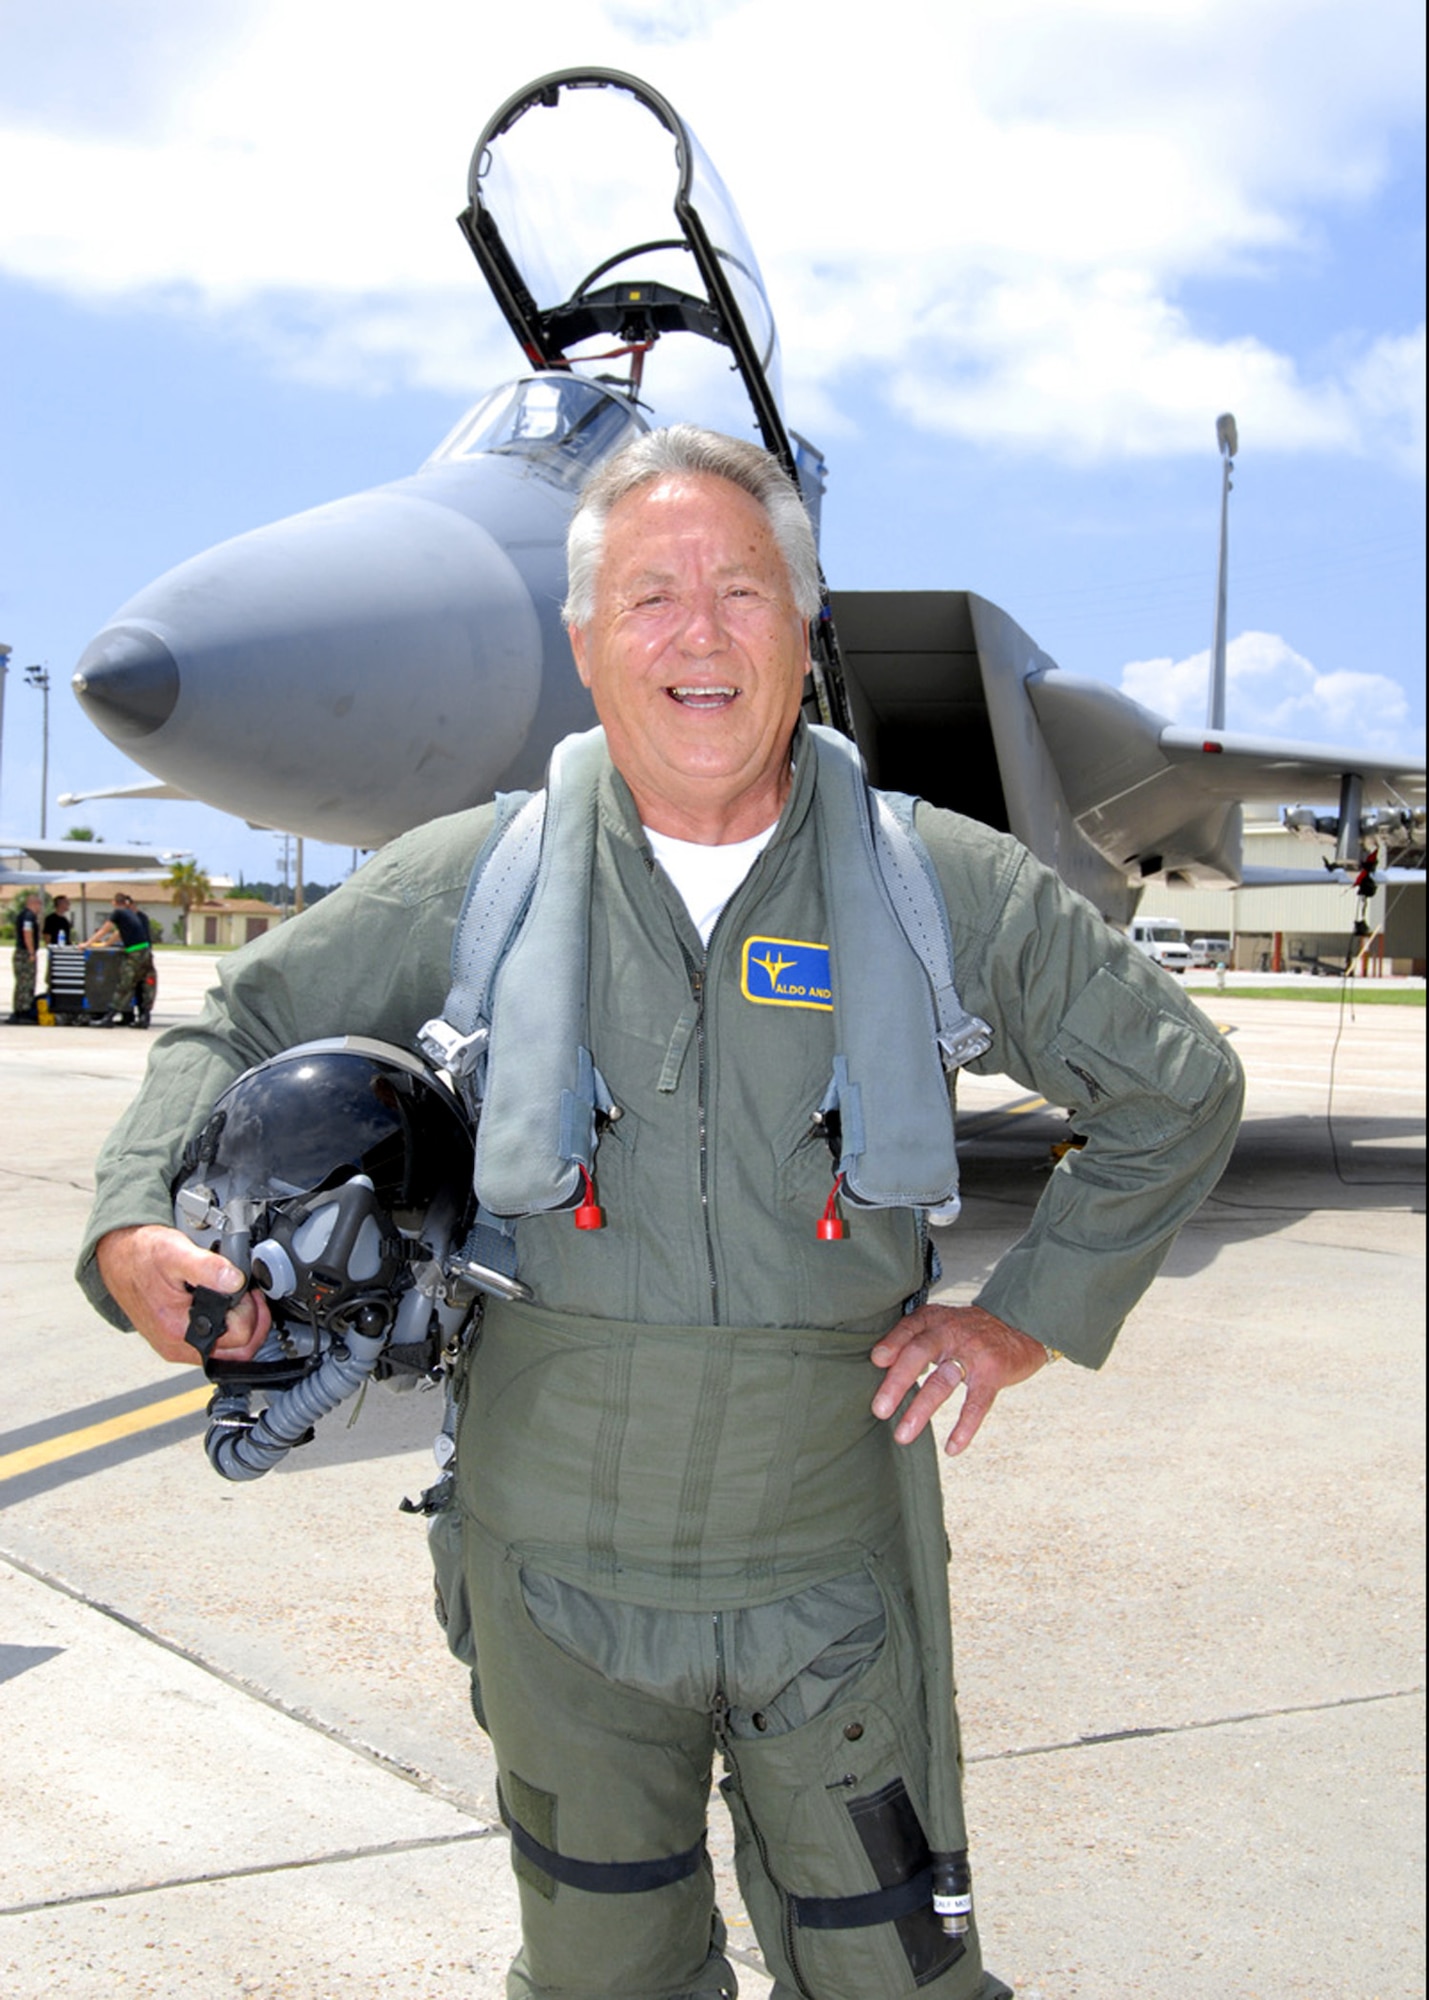 Aldo Andretti, twin brother to auto racing great Mario Andretti, gets ready for his incentive flight aboard a Tyndall AFB, Fla., F-15, July 11. (US Air Force photo by Lisa Norman)